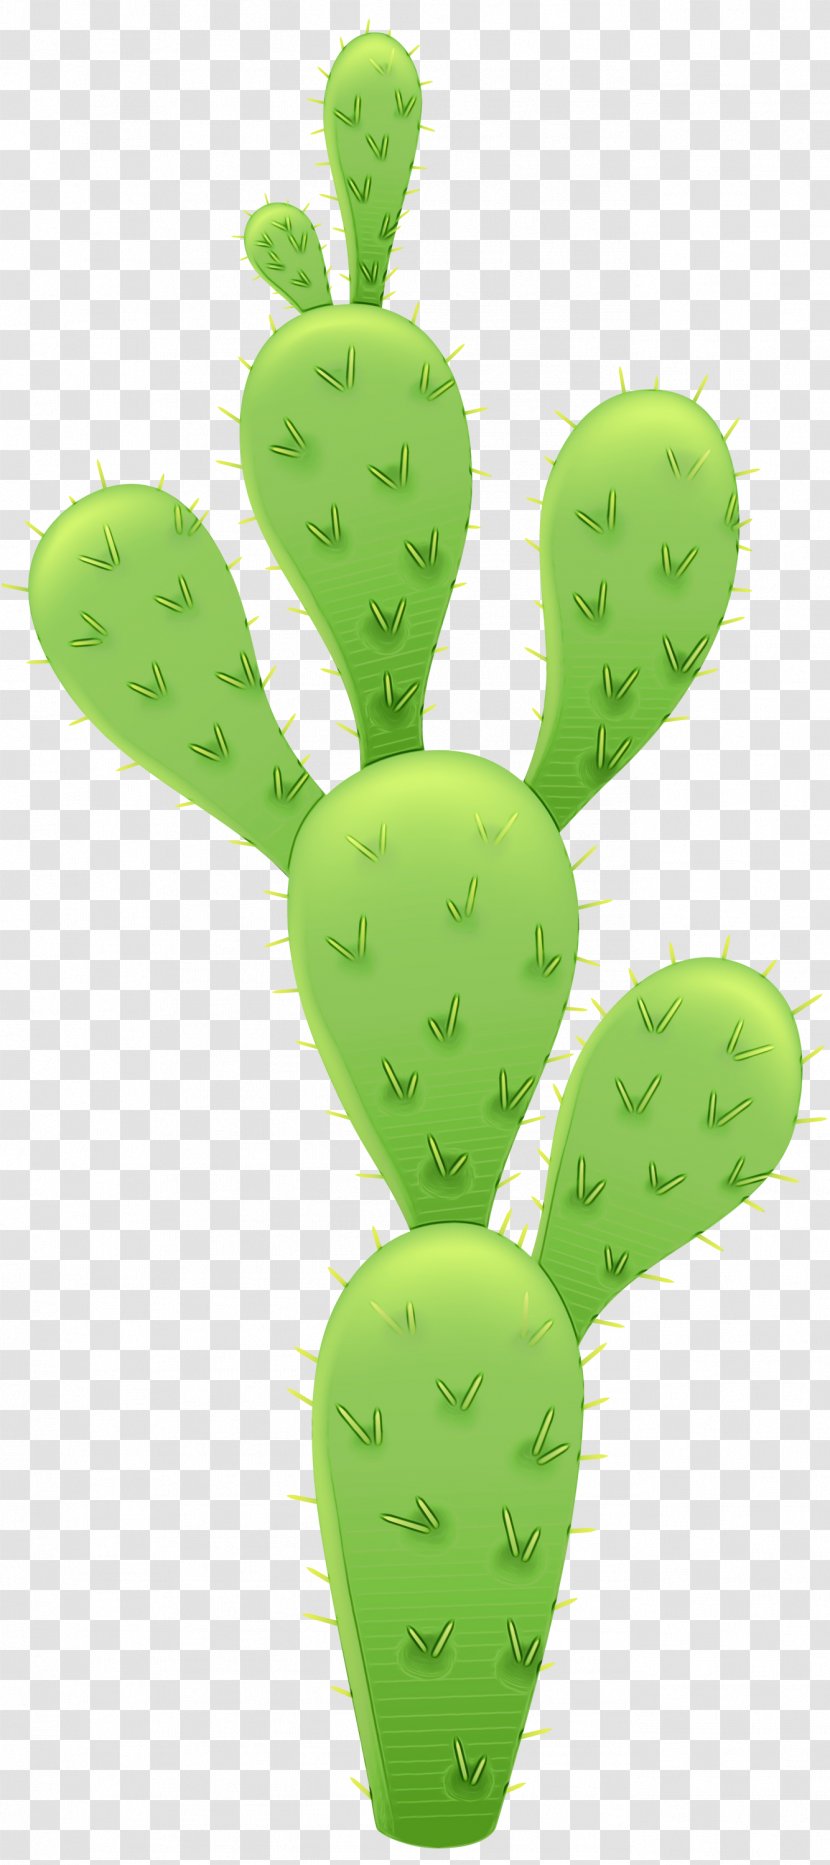 Bunny Ears Cactus Vector Graphics Plants Barbary Fig - Eastern Prickly Pear - Saguaro Transparent PNG